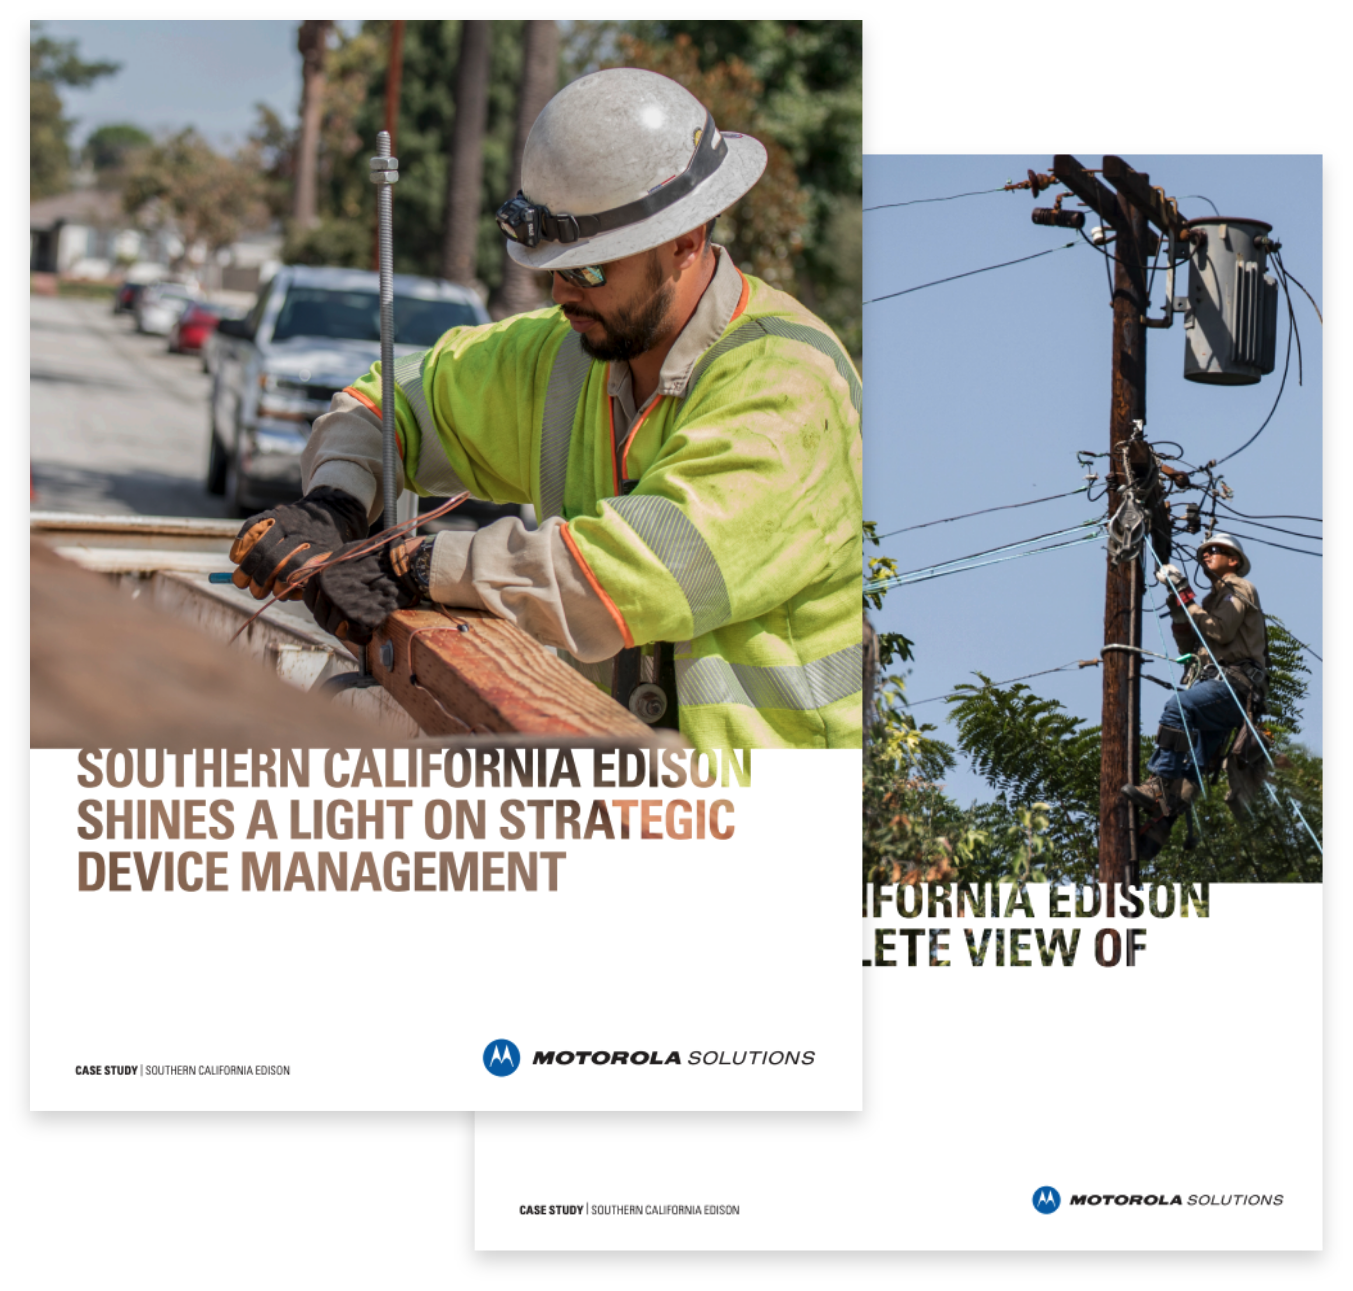 Southern california edison shines a light on strategic device management and Southern californiaedisongains a complete view of their system